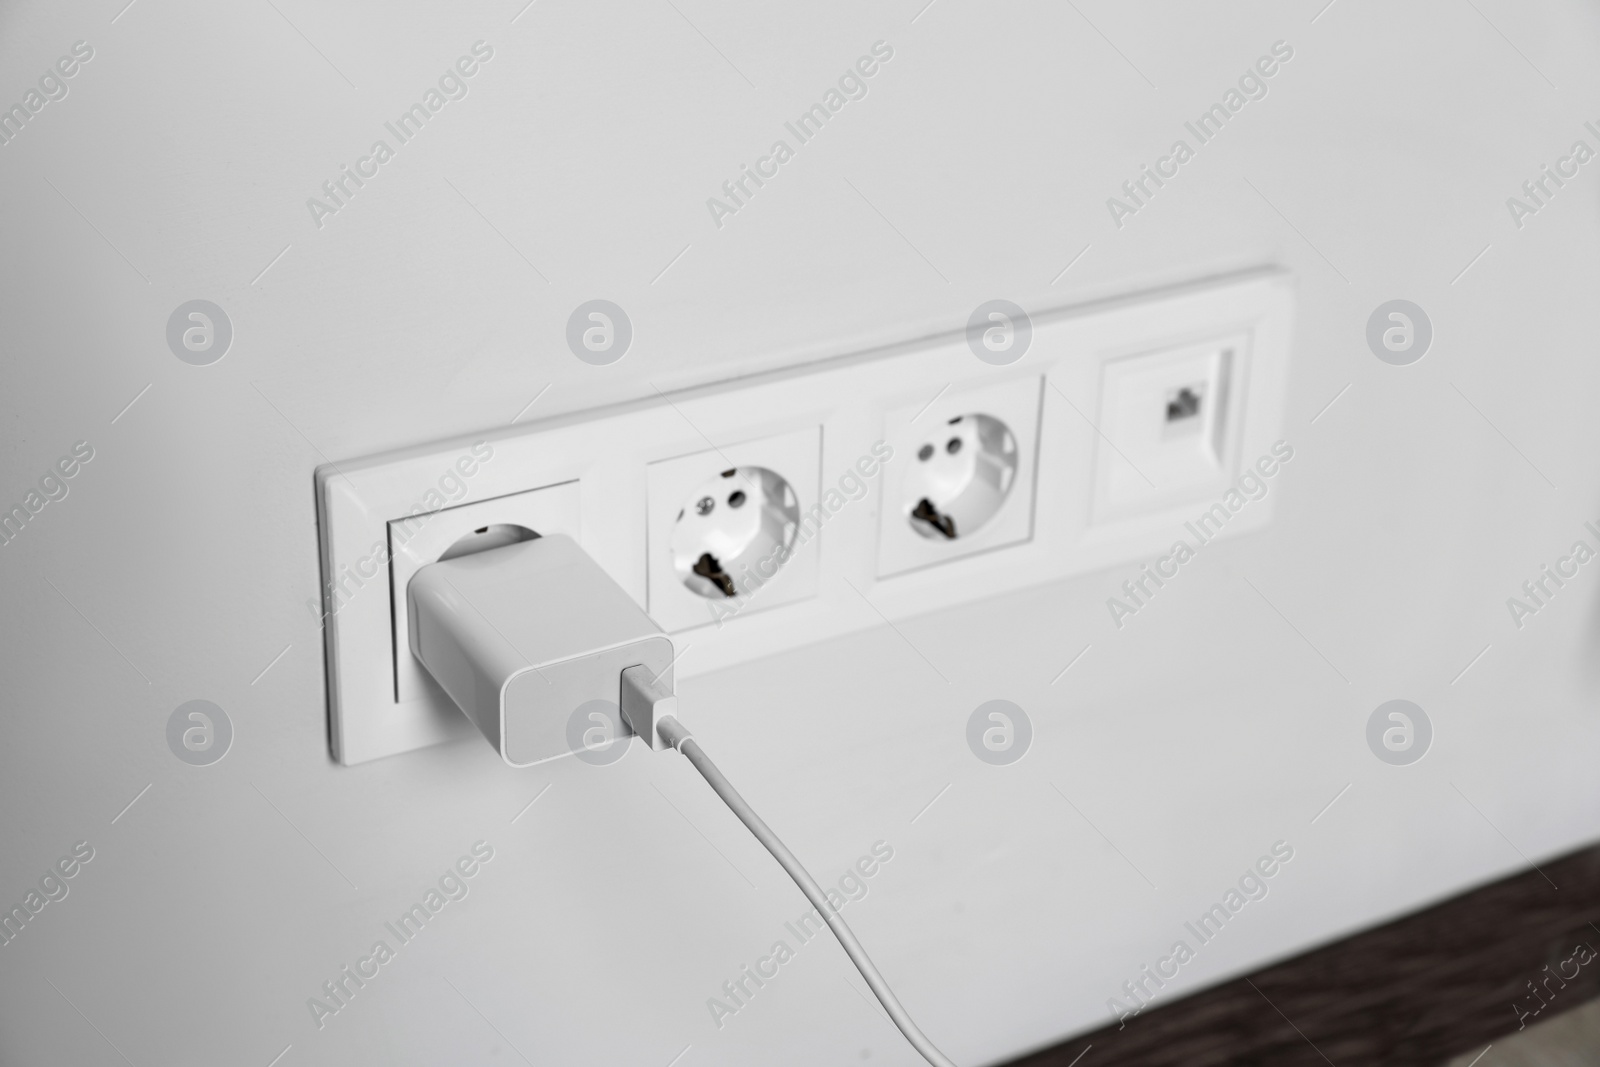 Photo of Charger adapter plugged in power socket indoors, space for text